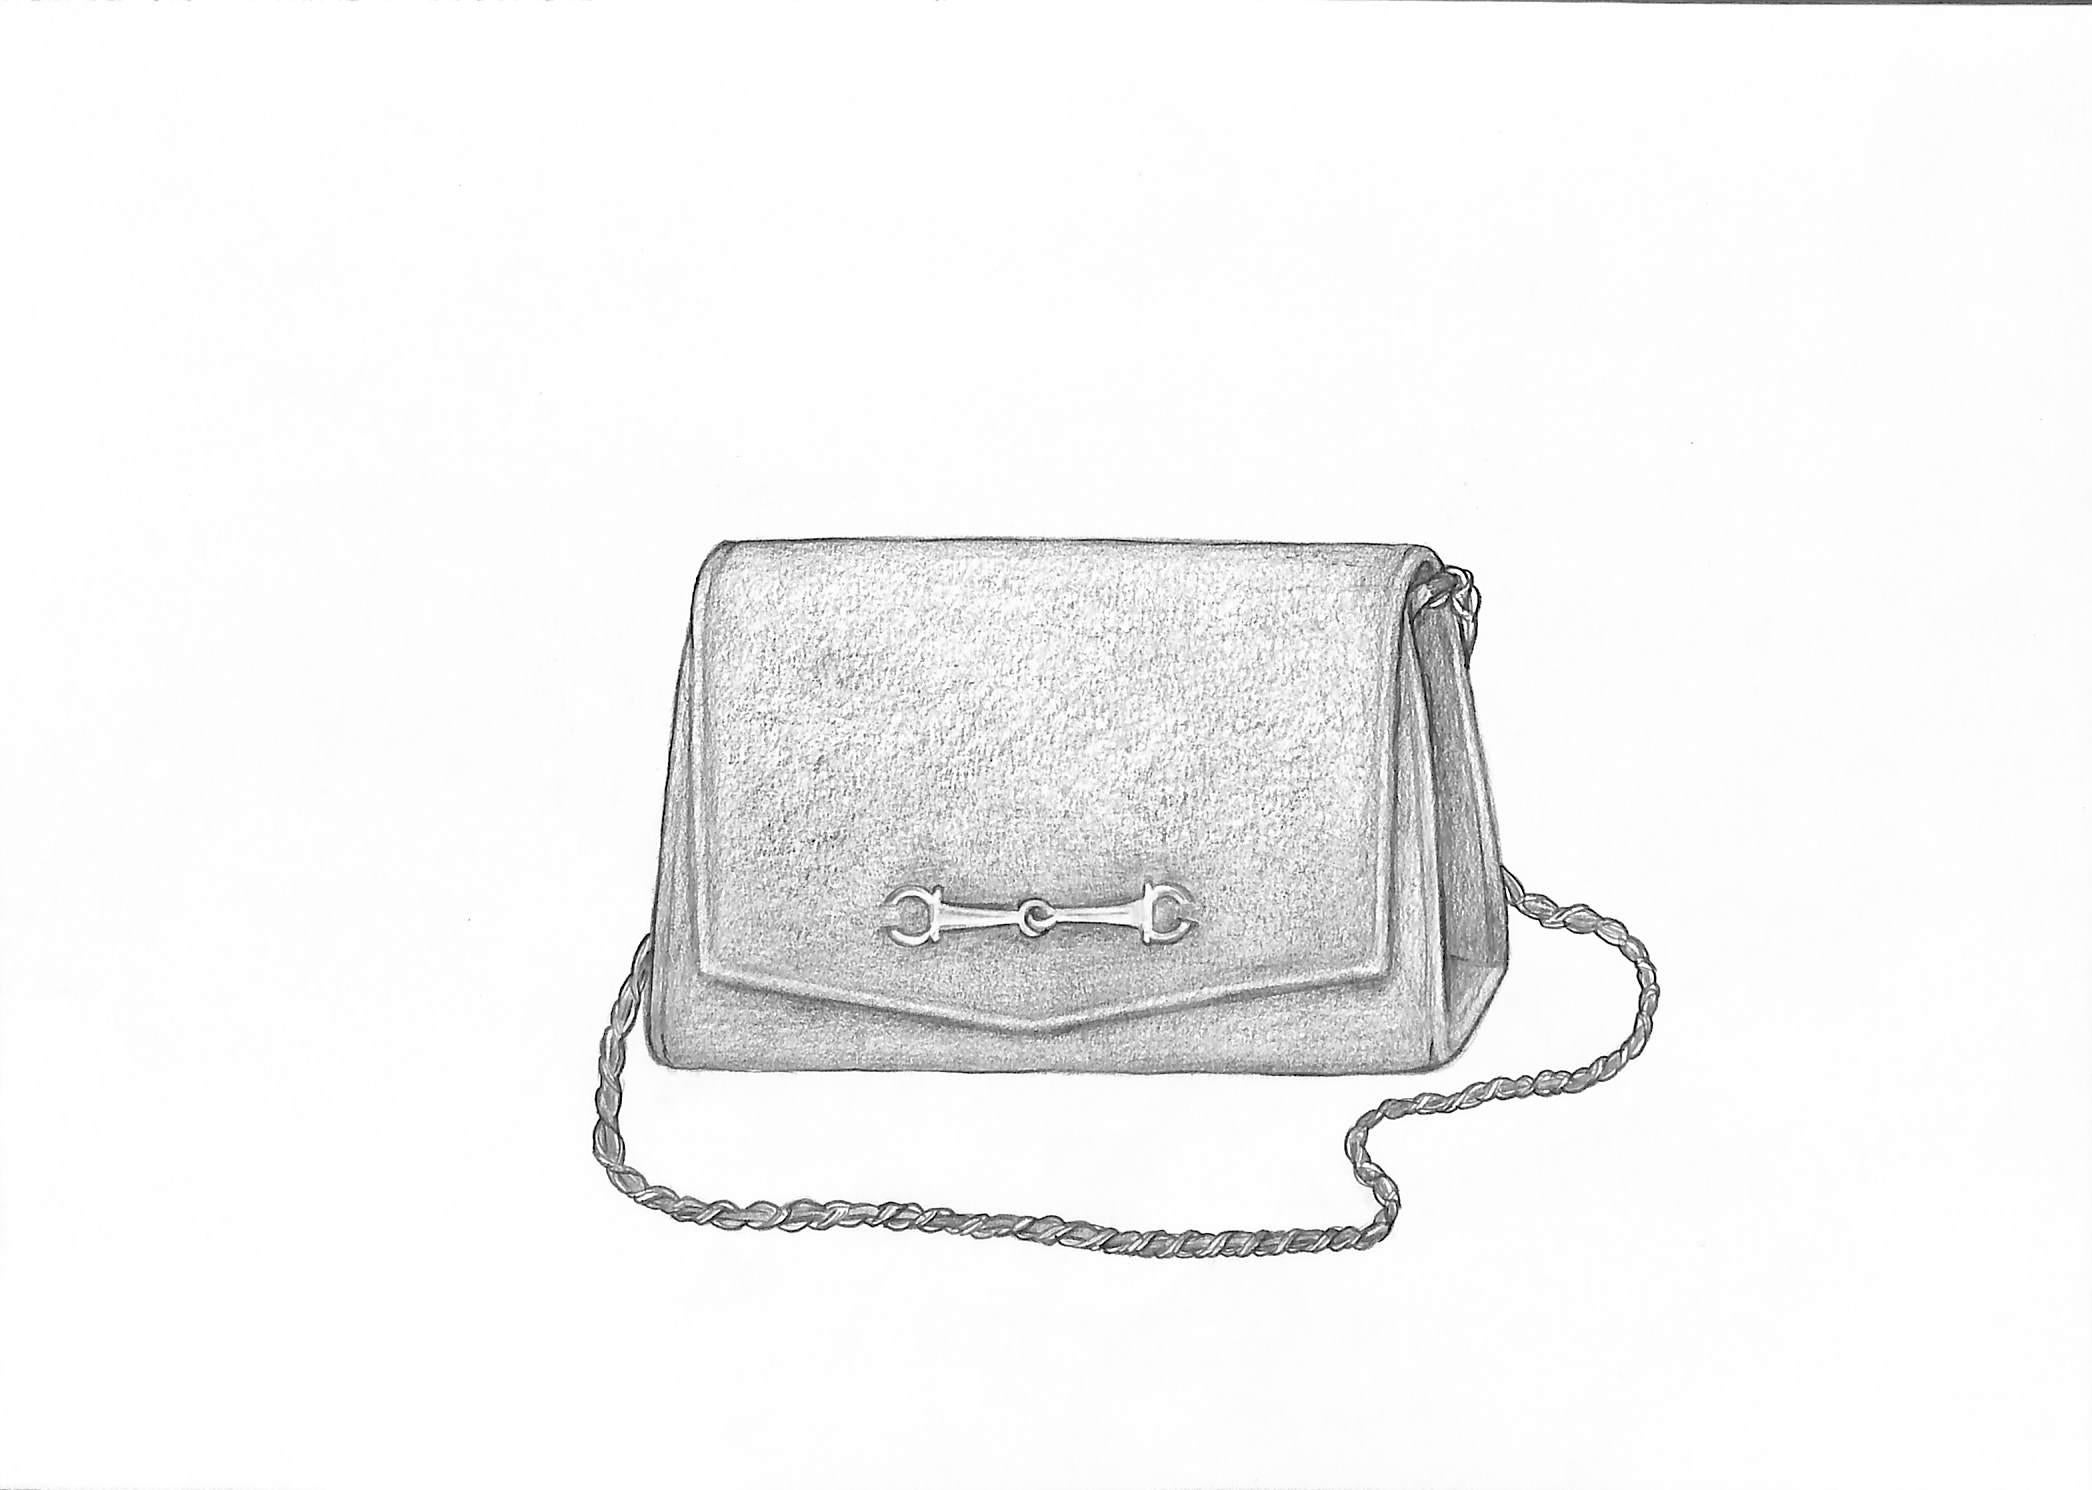 Snaffle Bit Evening Bag Graphite Drawing - Art by Unknown